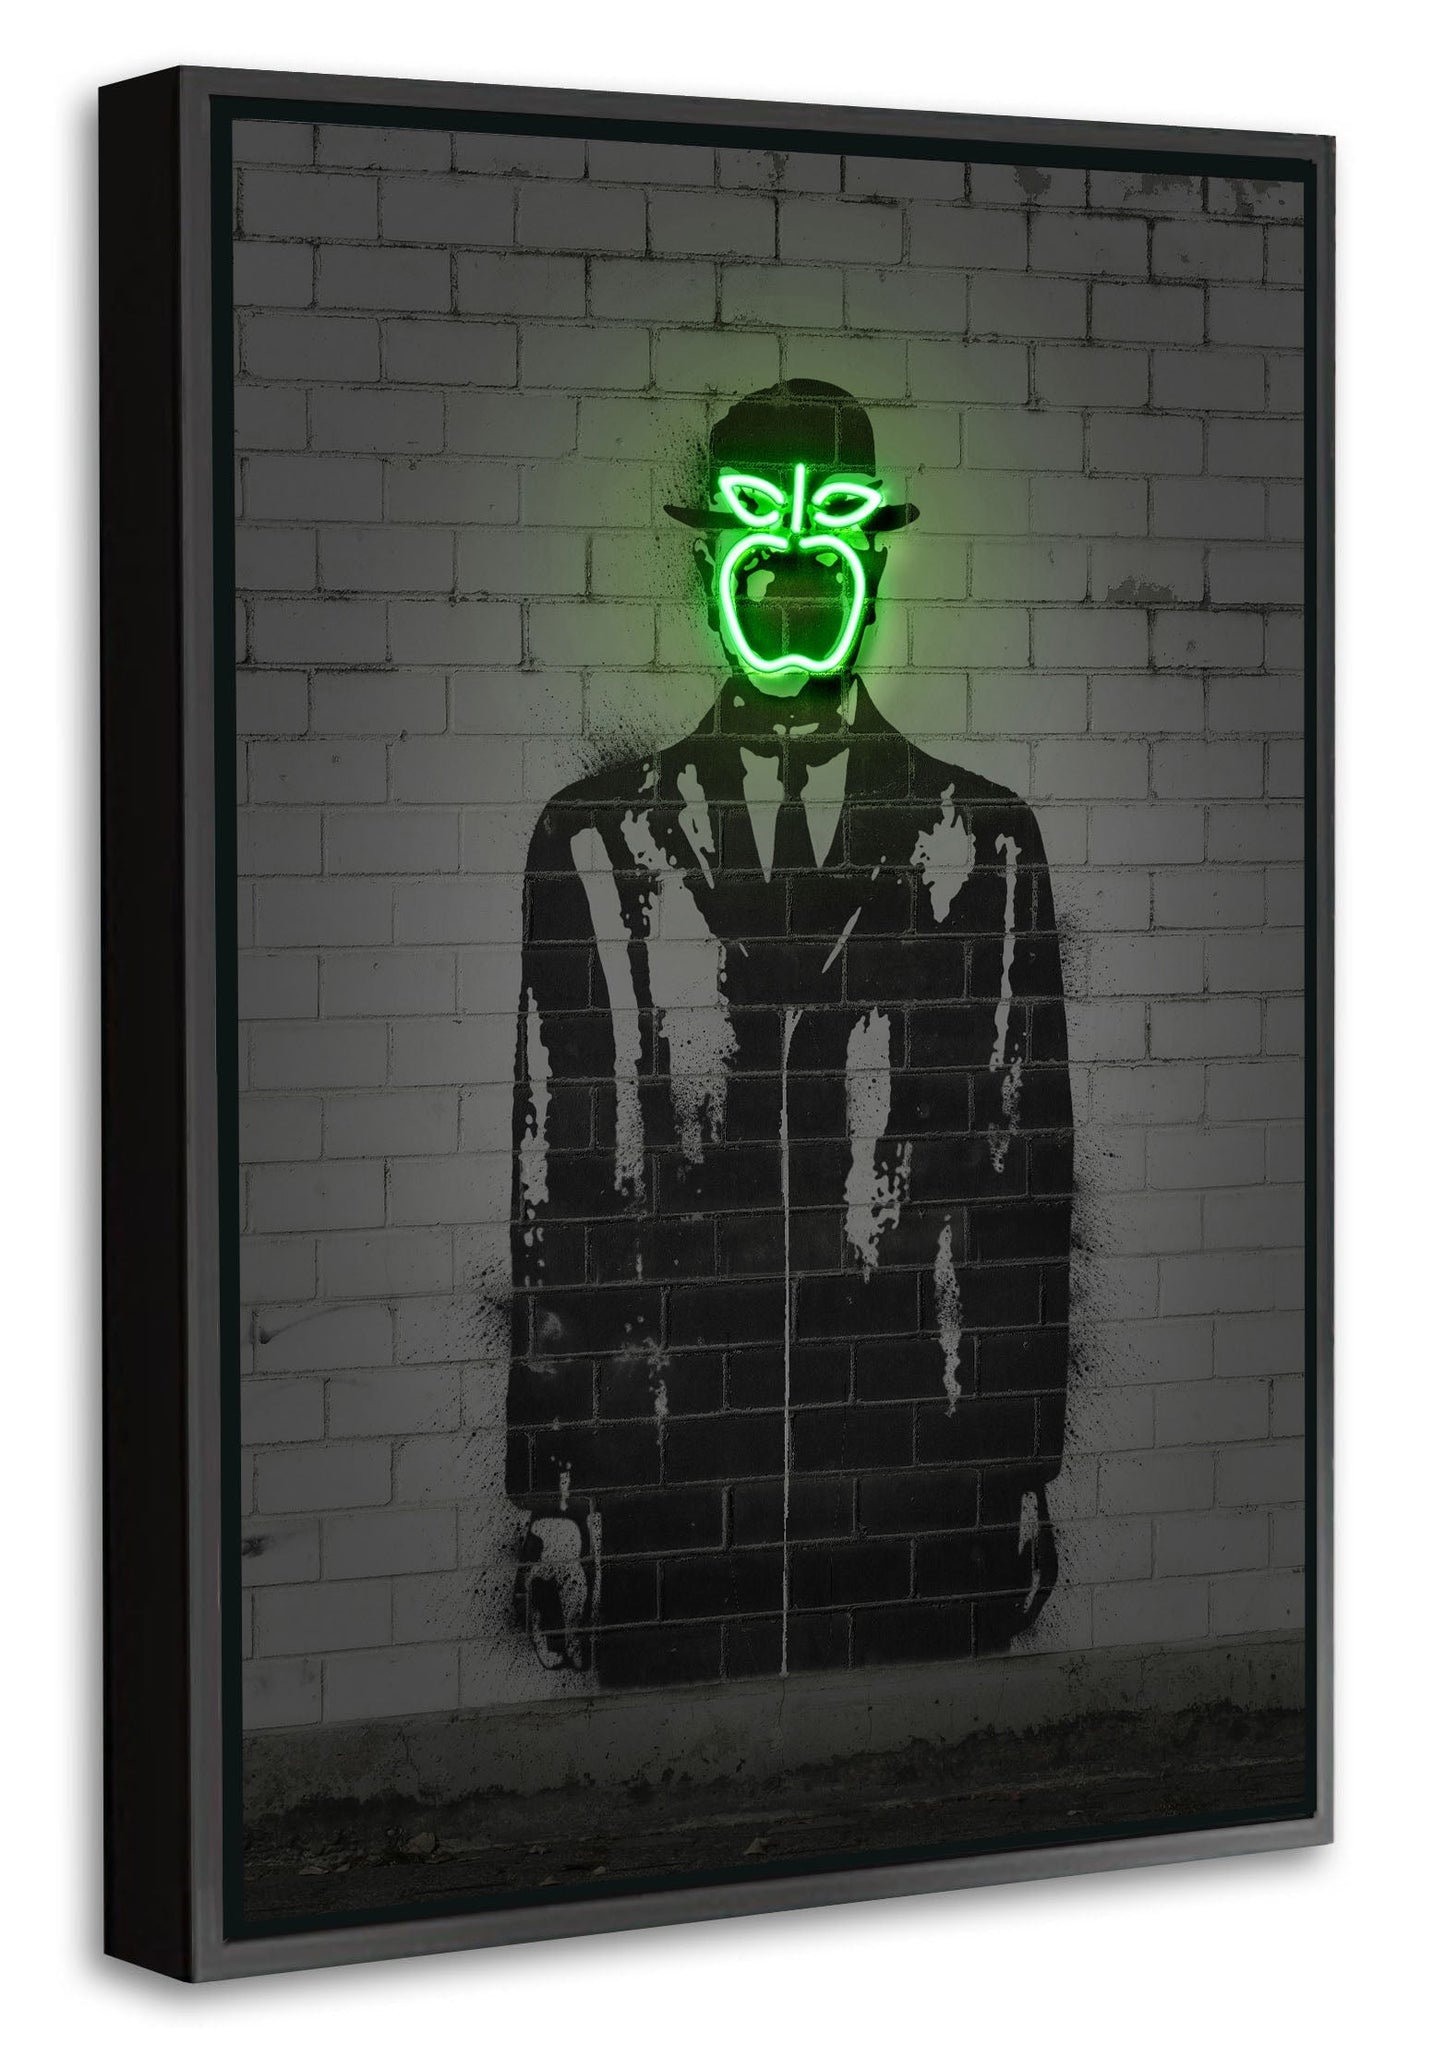 The Son of man-neon-art, print-Canvas Print with Box Frame-40 x 60 cm-BLUE SHAKER